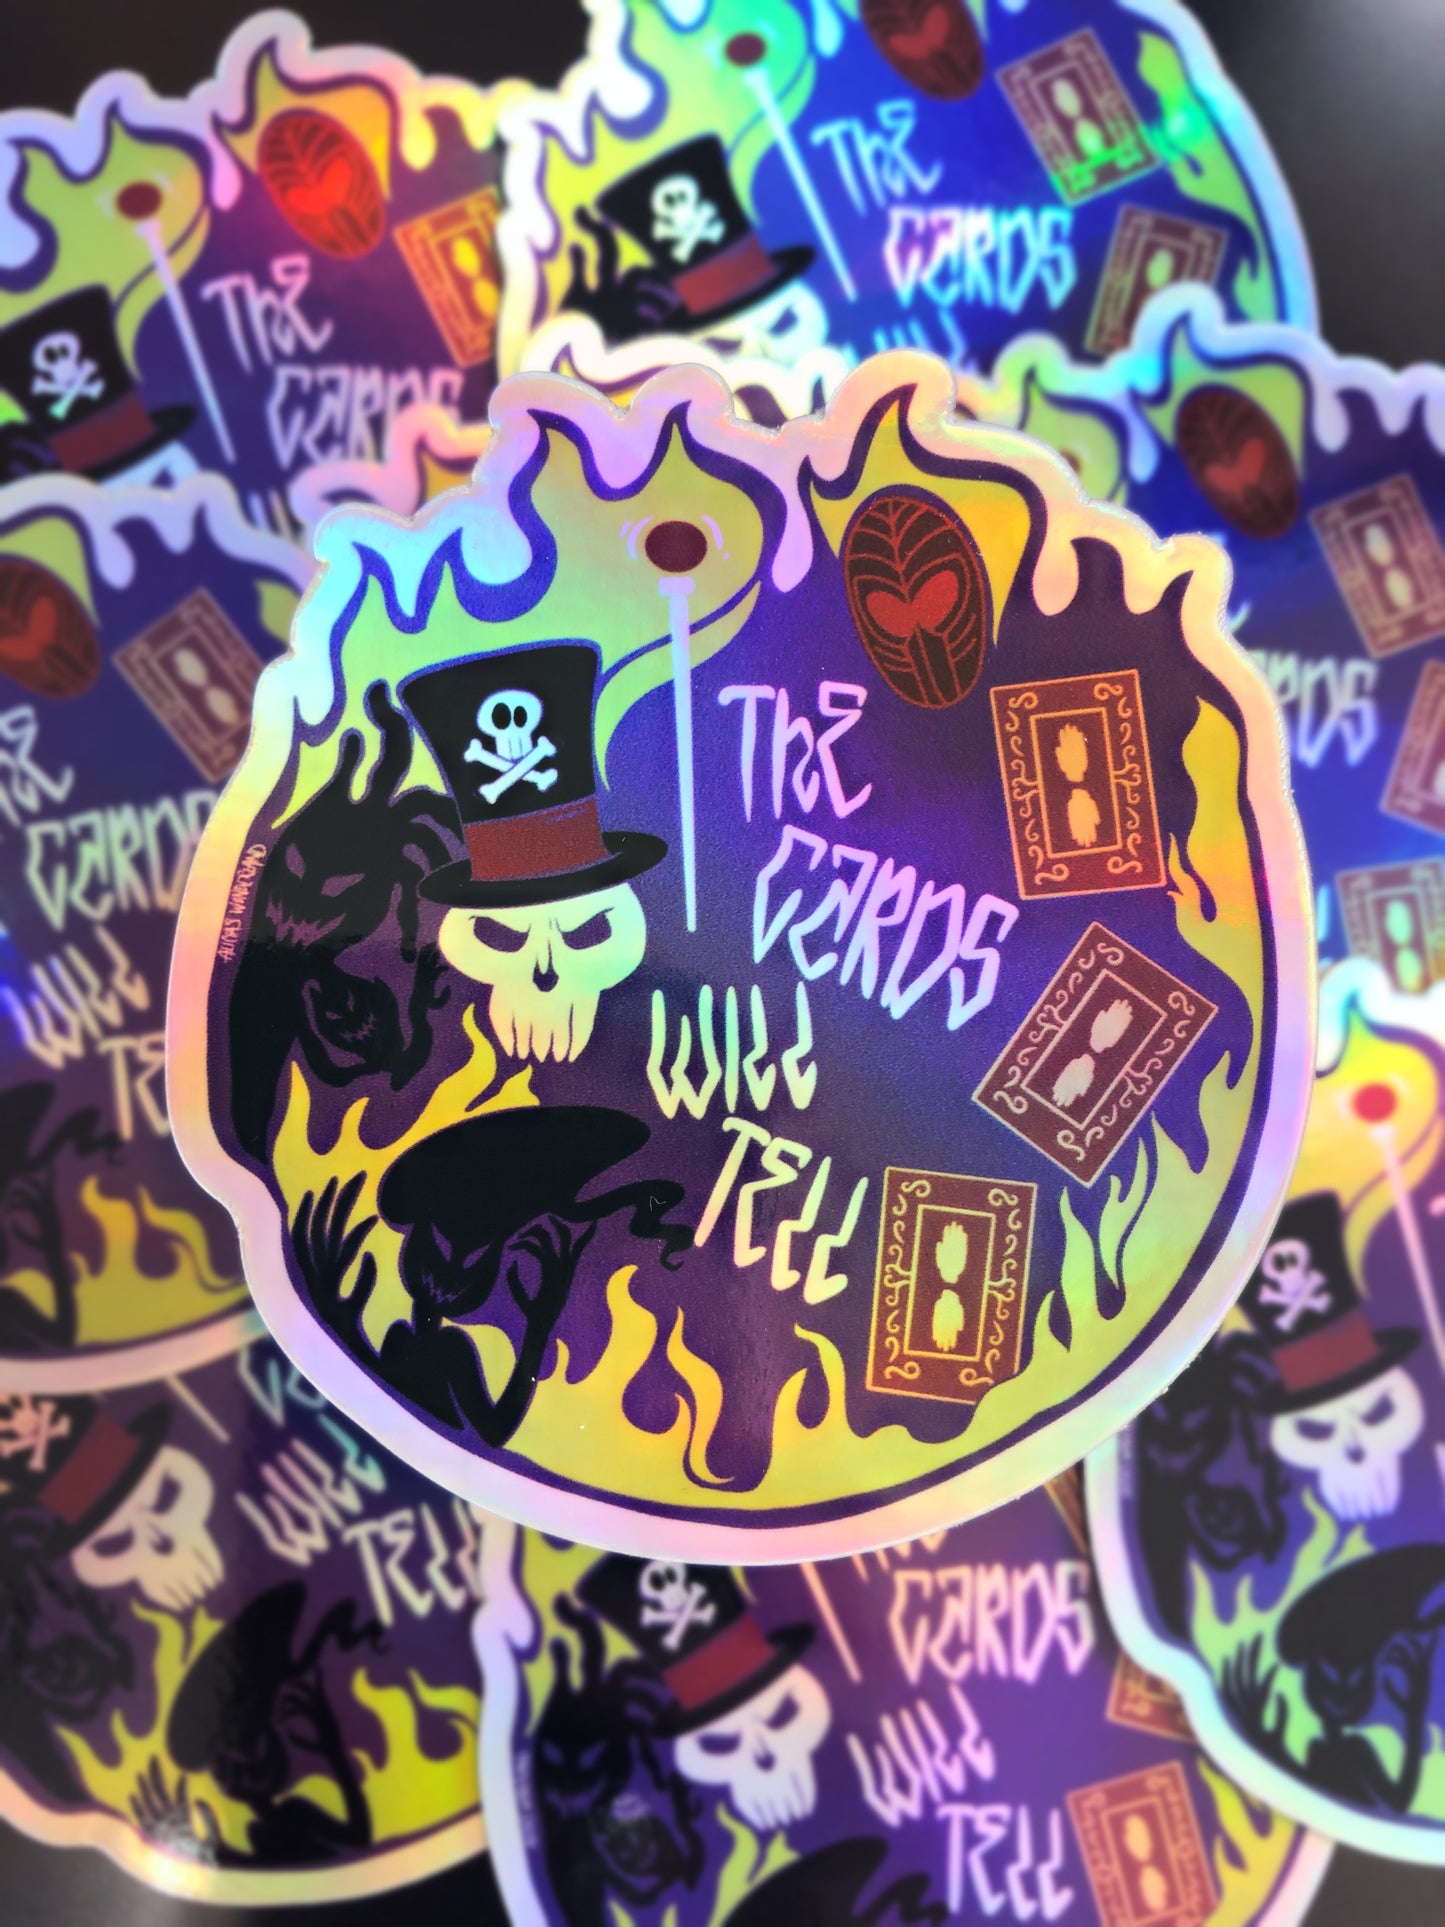 The Cards will tell Holographic Vinyl Sticker